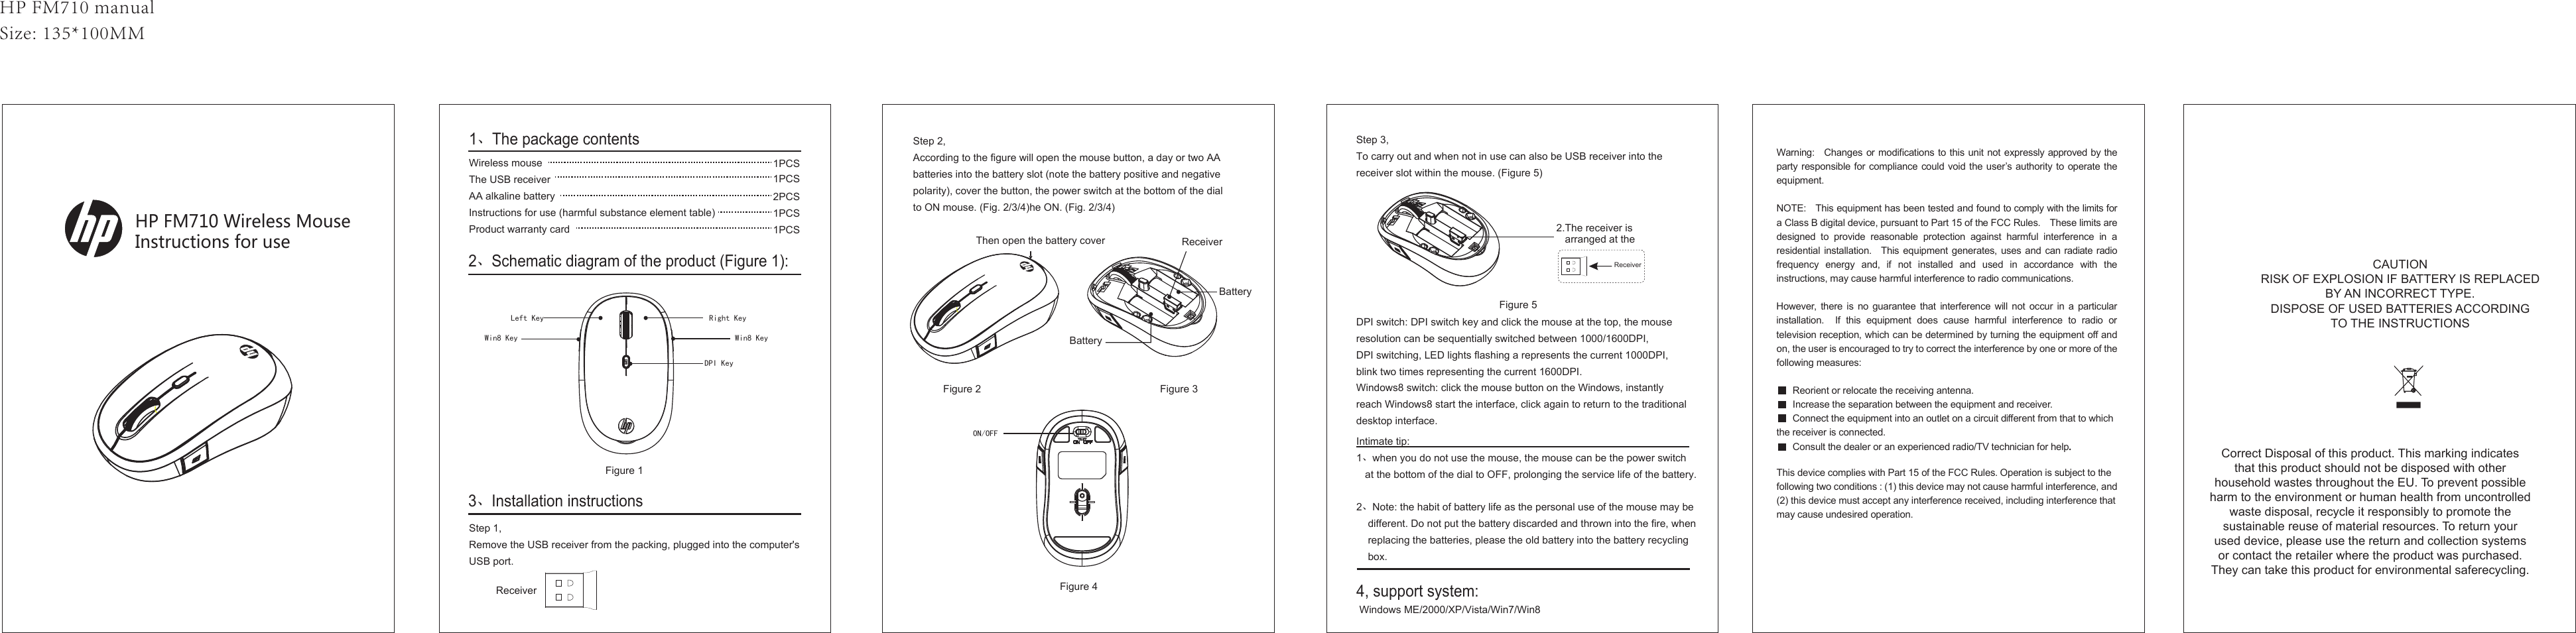 1、The package contents2、Schematic diagram of the product (Figure 1):3、Installation instructionsStep 3,To carry out and when not in use can also be USB receiver into the receiver slot within the mouse. (Figure 5)2.The receiver is    arranged at theIntimate tip:1、when you do not use the mouse, the mouse can be the power switch    at the bottom of the dial to OFF, prolonging the service life of the battery.2、Note: the habit of battery life as the personal use of the mouse may be     different. Do not put the battery discarded and thrown into the fire, when     replacing the batteries, please the old battery into the battery recycling     box.4, support system: Windows ME/2000/XP/Vista/Win7/Win8HP FM710 Wireless MouseInstructions for use1PCS1PCS2PCS1PCS1PCSStep 2,According to the figure will open the mouse button, a day or two AA batteries into the battery slot (note the battery positive and negative polarity), cover the button, the power switch at the bottom of the dial to ON mouse. (Fig. 2/3/4)he ON. (Fig. 2/3/4)HP FM710 manualSize: 135*100MMFigure 1Figure 2 Figure 3Figure 5Figure 4Then open the battery coverRight KeyWin8 KeyDPI KeyBatteryBatteryReceiverReceiverLeft KeyWin8 Key ON/OFFDPI switch: DPI switch key and click the mouse at the top, the mouse resolution can be sequentially switched between 1000/1600DPI, DPI switching, LED lights flashing a represents the current 1000DPI, blink two times representing the current 1600DPI.Windows8 switch: click the mouse button on the Windows, instantly reach Windows8 start the interface, click again to return to the traditional desktop interface.Wireless mouseThe USB receiverAA alkaline batteryInstructions for use (harmful substance element table)Product warranty cardStep 1,Remove the USB receiver from the packing, plugged into the computer&apos;s USB port.ReceiverWarning:    Changes or modifications to this unit not expressly approved by the party responsible for compliance could void the user’s authority to operate the equipment.     NOTE:    This equipment has been tested and found to comply with the limits for a Class B digital device, pursuant to Part 15 of the FCC Rules.    These limits are designed  to  provide  reasonable  protection  against  harmful  interference  in  a residential installation.    This  equipment  generates,  uses and can radiate radio frequency  energy  and,  if  not  installed and  used  in  accordance  with  the instructions, may cause harmful interference to radio communications. However,  there  is  no  guarantee  that interference  will not  occur  in  a  particular installation.    If  this  equipment  does  cause  harmful  interference  to  radio  or television reception, which can be determined by turning the equipment off and on, the user is encouraged to try to correct the interference by one or more of the following measures: Reorient or relocate the receiving antenna. Increase the separation between the equipment and receiver.Connect the equipment into an outlet on a circuit different from that to which the receiver is connected.Consult the dealer or an experienced radio/TV technician for help.    This device complies with Part 15 of the FCC Rules. Operation is subject to the following two conditions : (1) this device may not cause harmful interference, and (2) this device must accept any interference received, including interference that may cause undesired operation.     CAUTIONRISK OF EXPLOSION IF BATTERY IS REPLACEDBY AN INCORRECT TYPE.DISPOSE OF USED BATTERIES ACCORDINGTO THE INSTRUCTIONSCorrect Disposal of this product. This marking indicates that this product should not be disposed with other household wastes throughout the EU. To prevent possible harm to the environment or human health from uncontrolled waste disposal, recycle it responsibly to promote the sustainable reuse of material resources. To return your used device, please use the return and collection systems or contact the retailer where the product was purchased. They can take this product for environmental saferecycling.